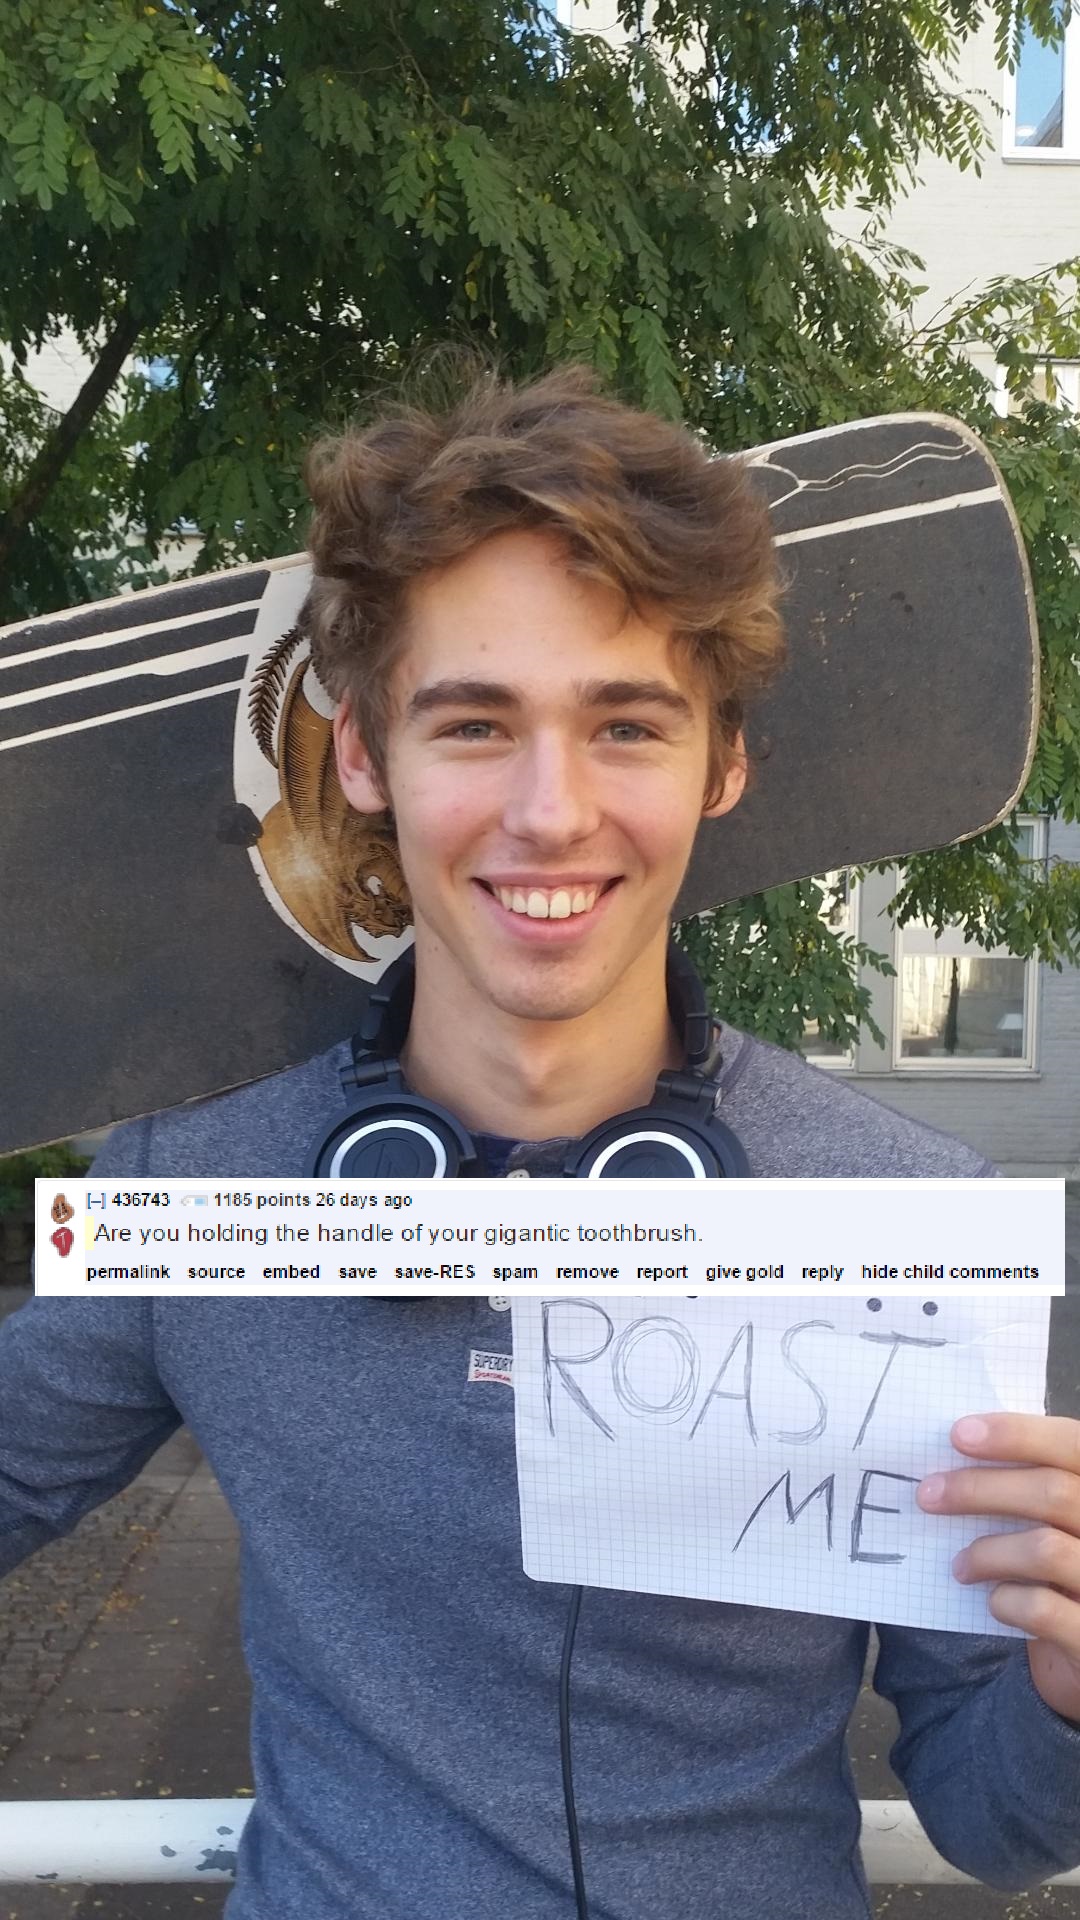 Skater with big teeth asks to be roasted and they joke that his skateboard is just the handle to his giant toothbrush.